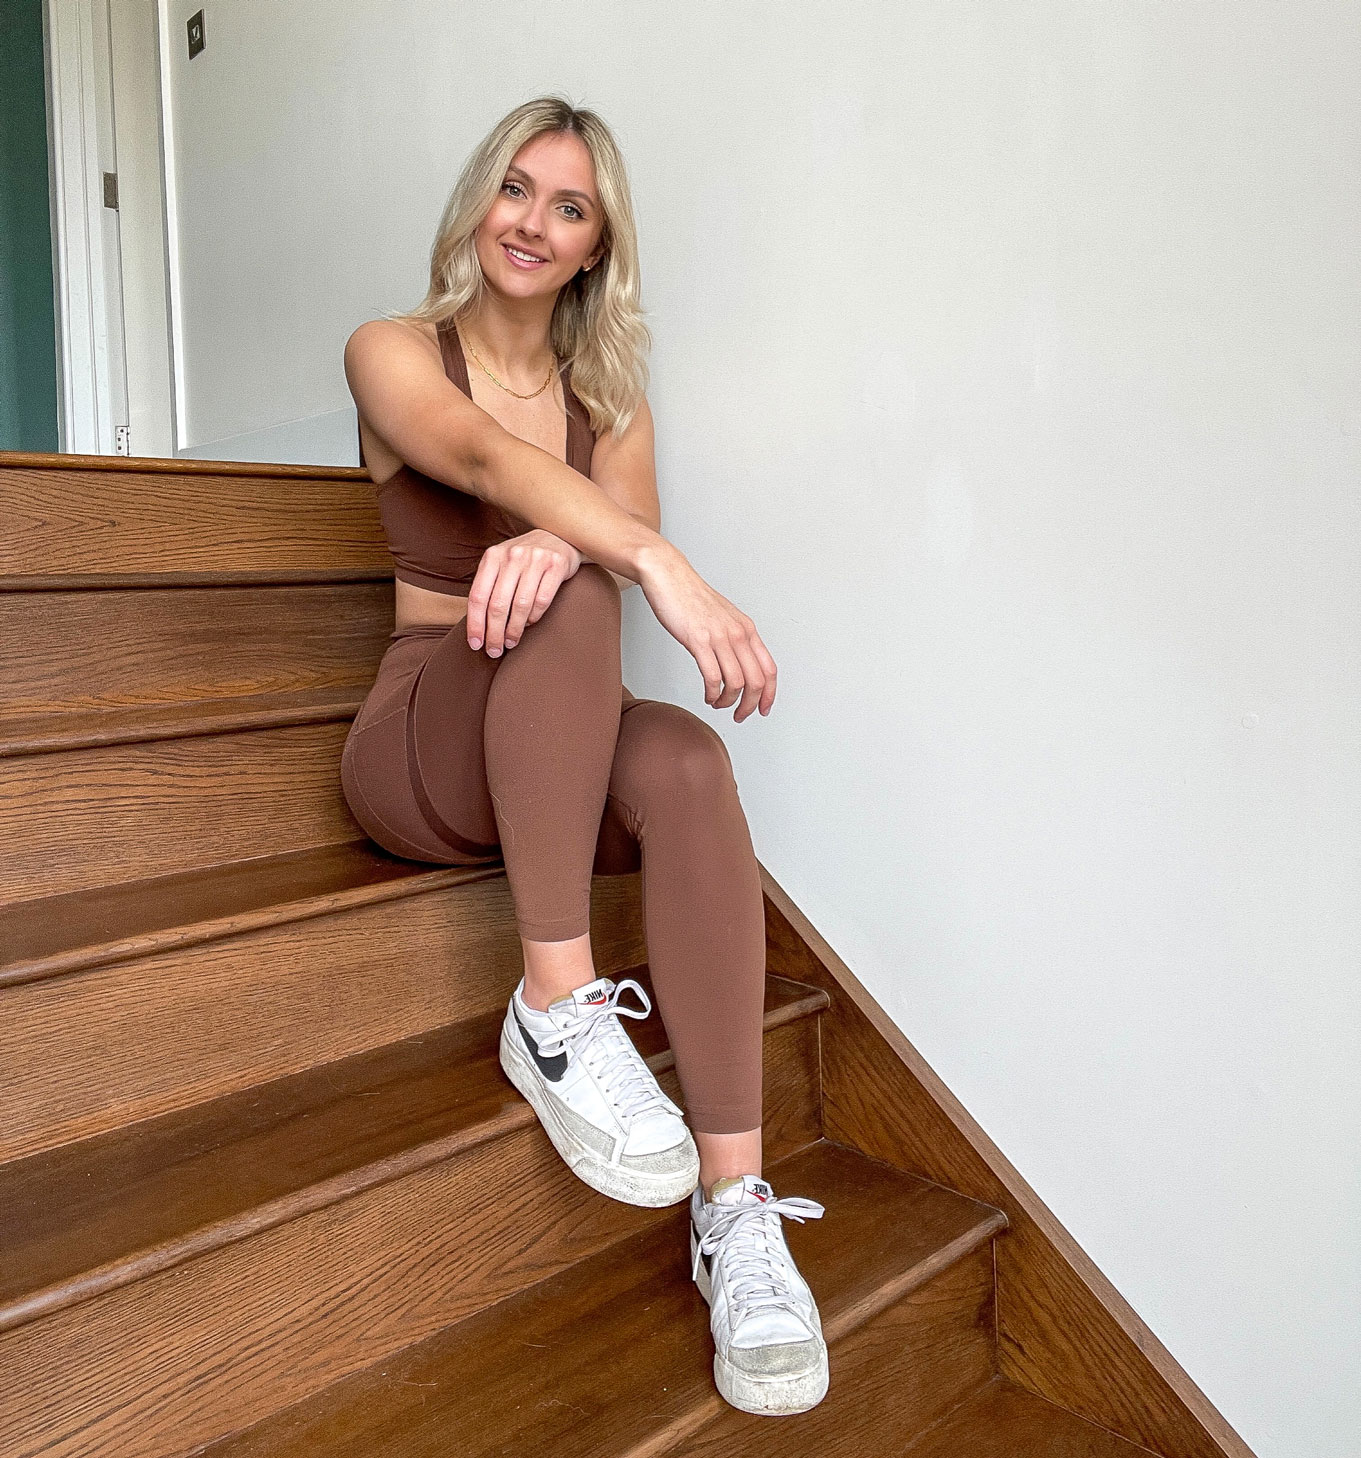 Coach Hannah Tucker sitting on stairs facing the camera and smiling with her hands on her knee